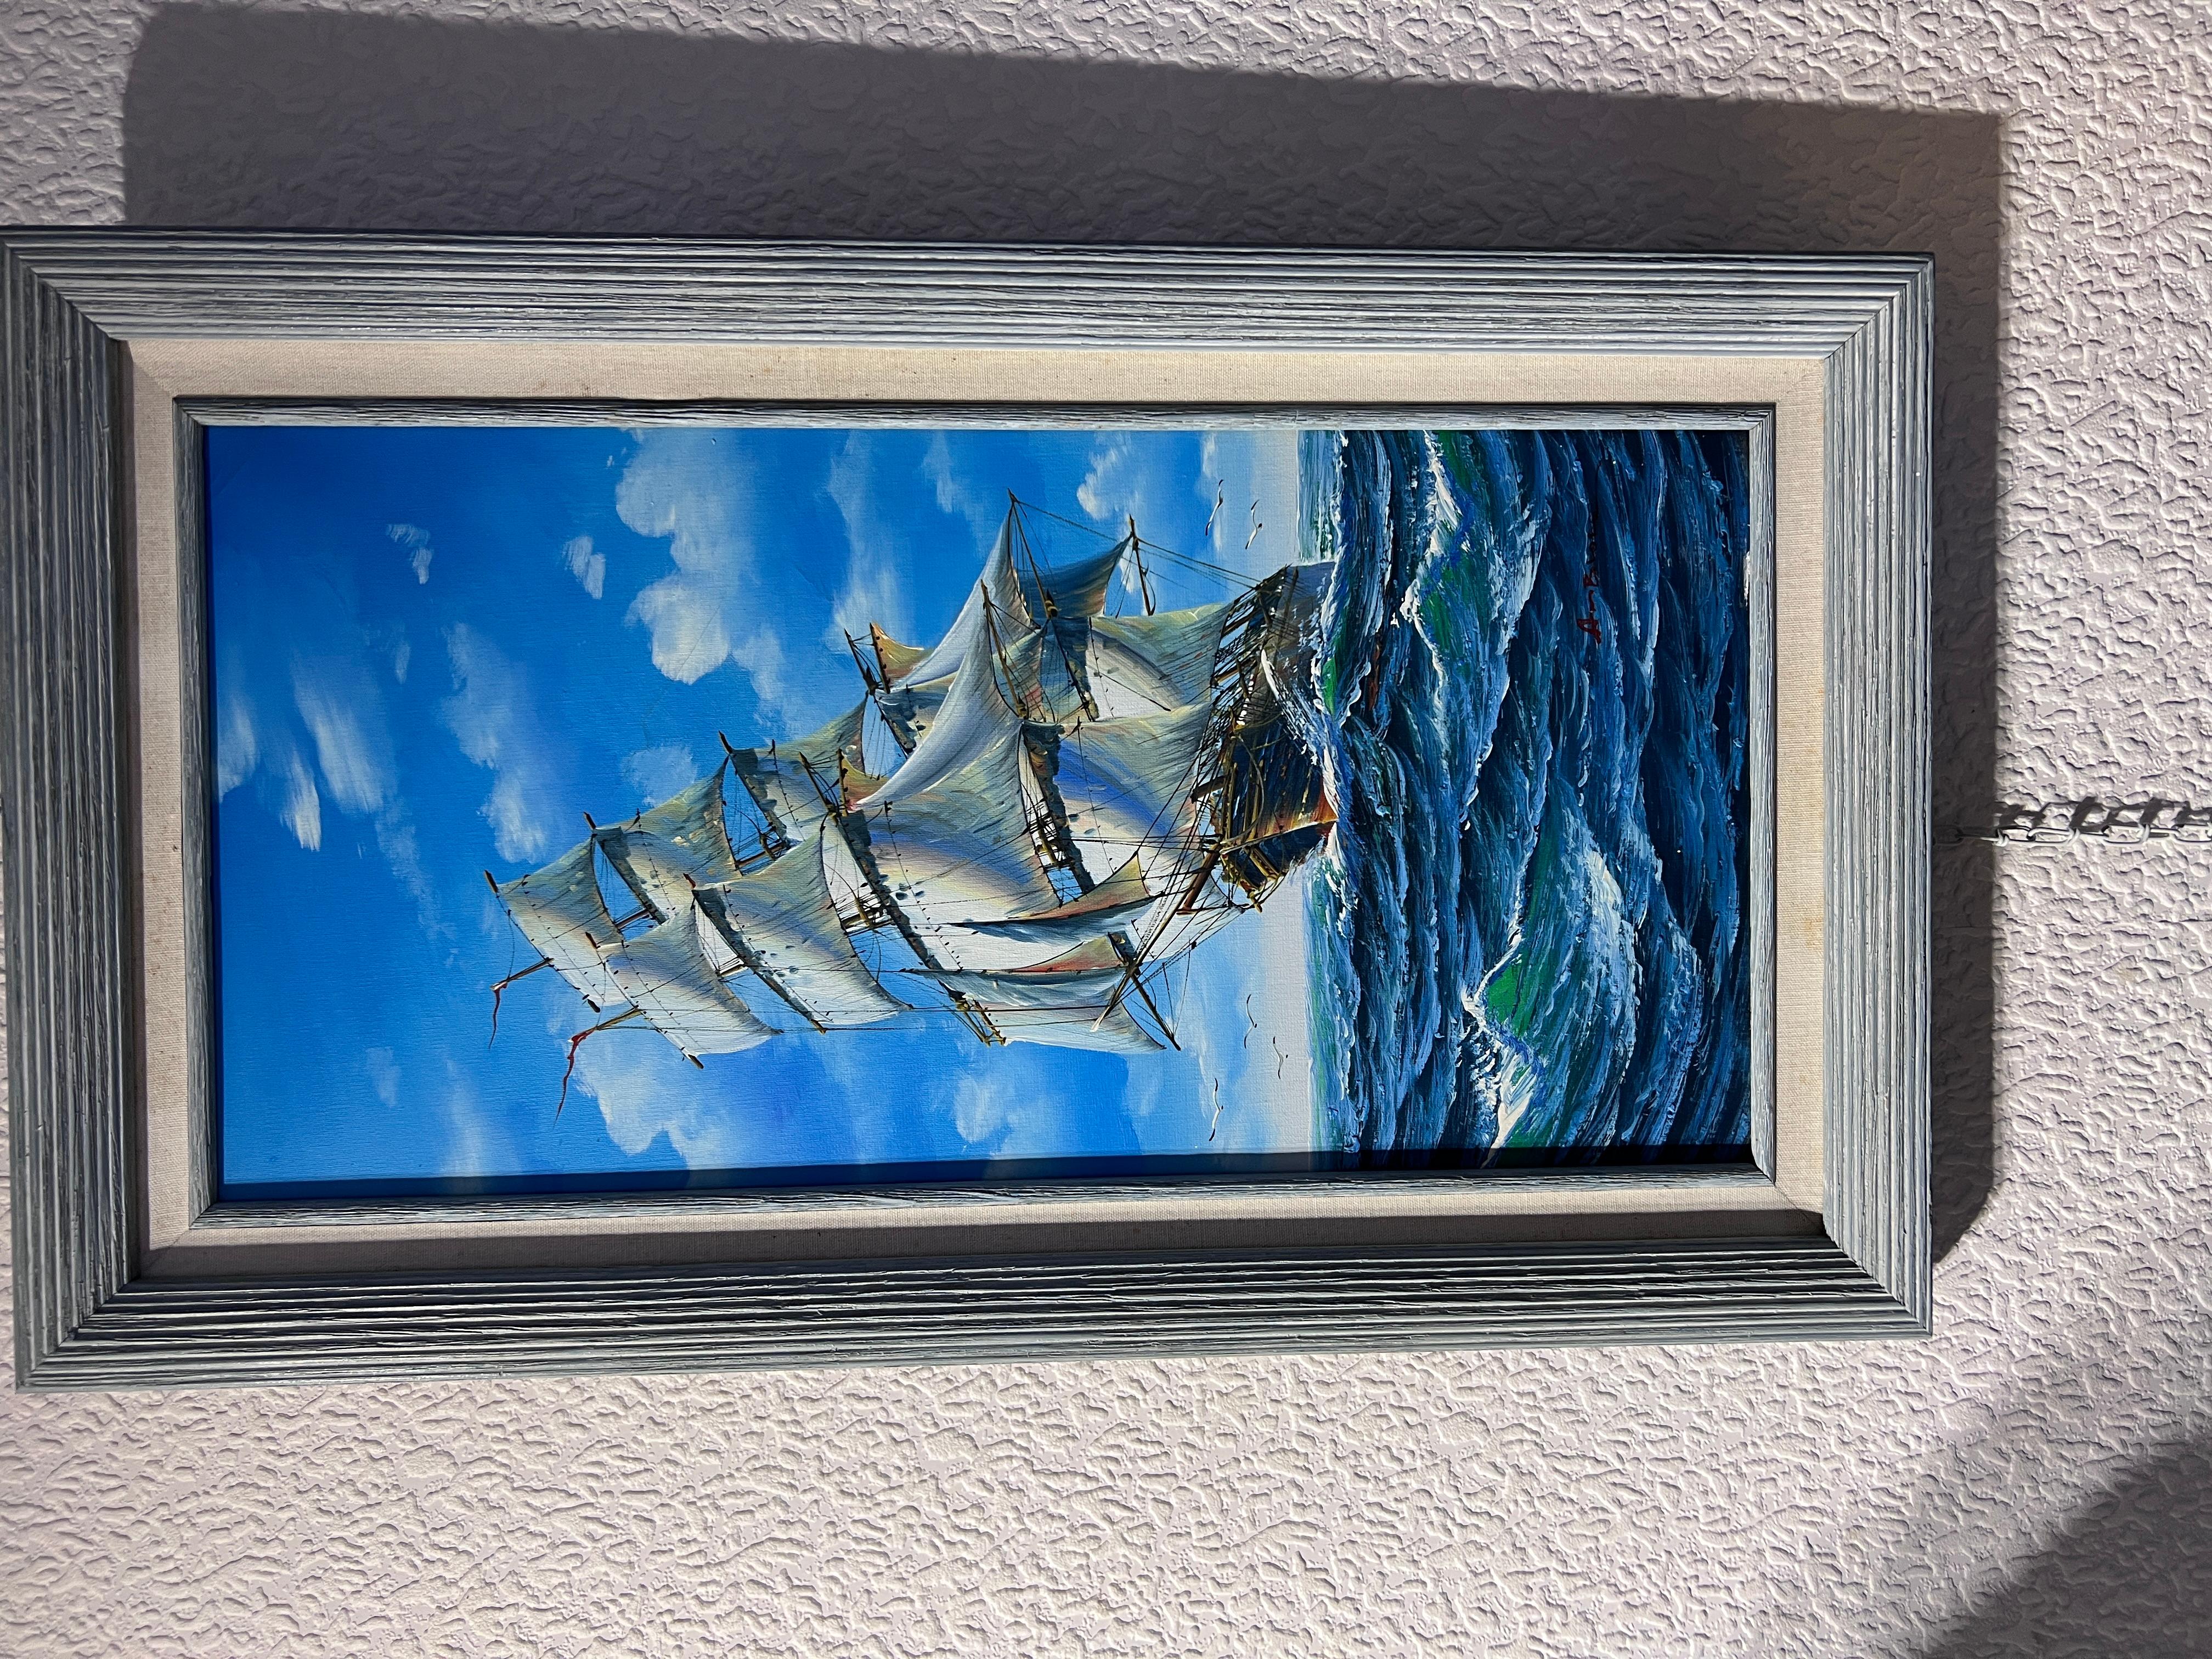 This oil painting captures the majesty of a tall ship in full sail on the high seas. Its sails are billowing in the wind, brilliantly white against the soft blue hues of the sky. The ship itself is rendered in fine detail, indicating the strength